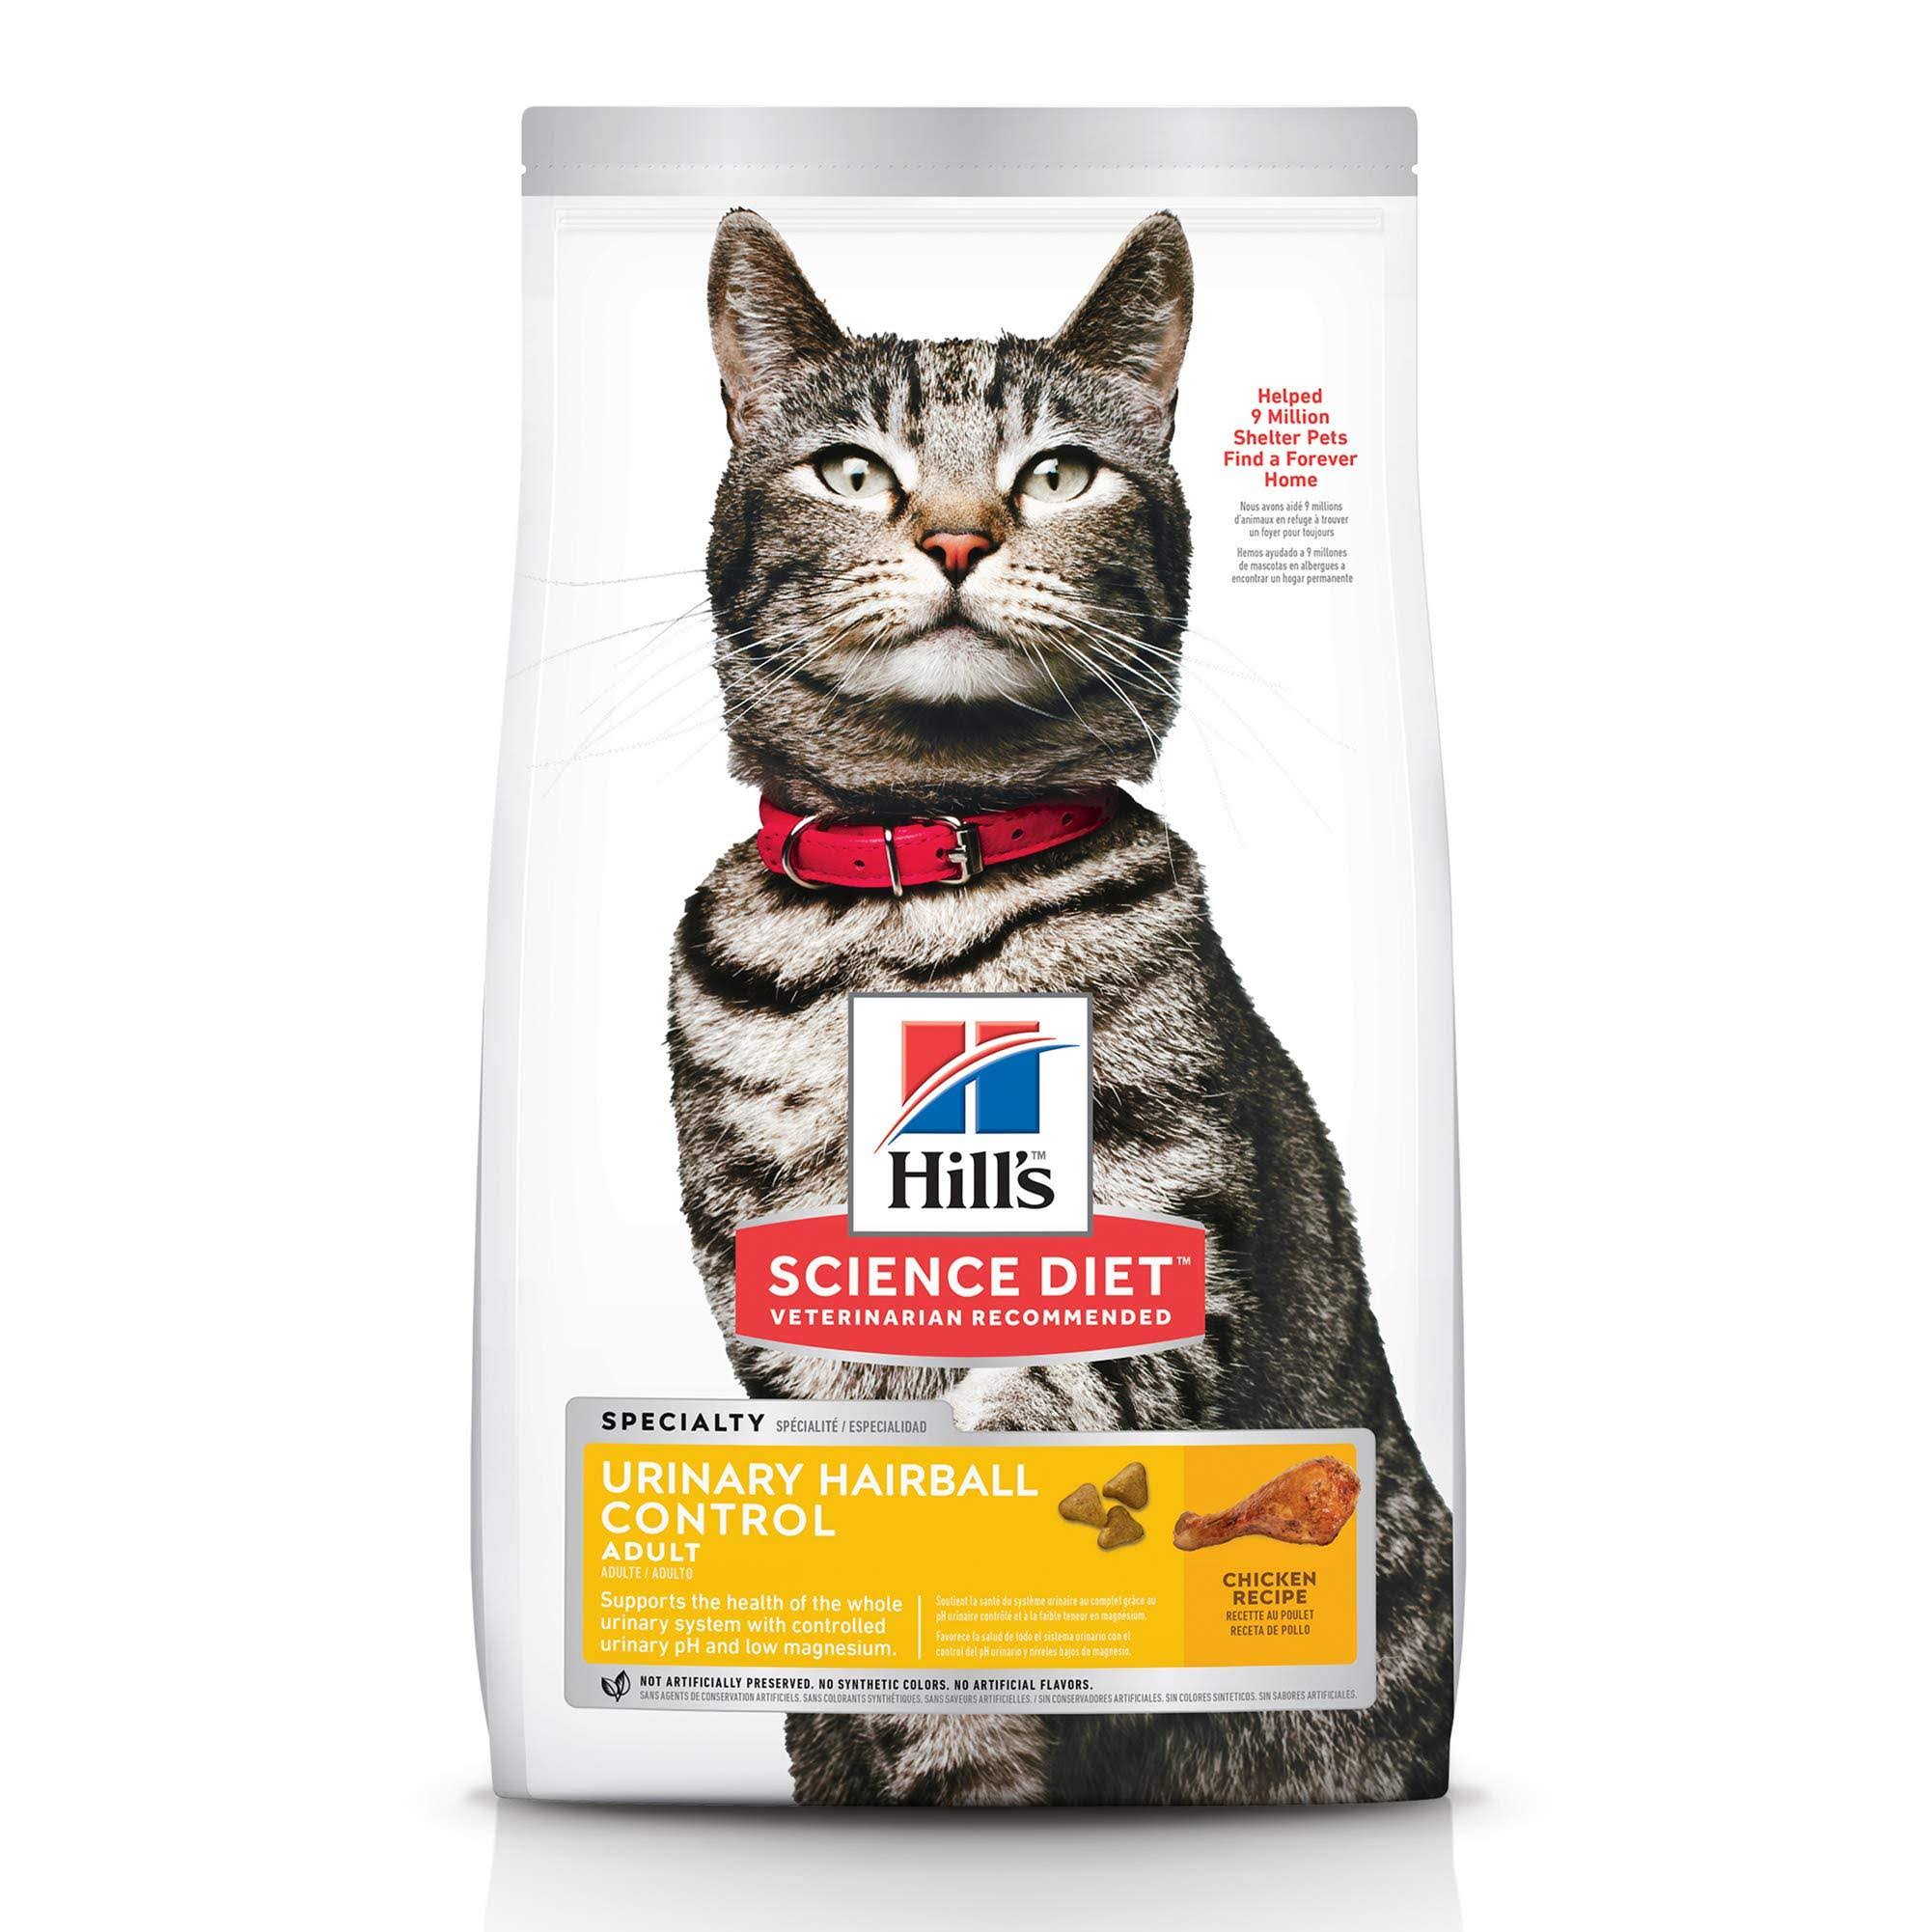 Hills Science Diet Adult Urinary Hairball Control Cat Food - Chicken, 3.5lbs